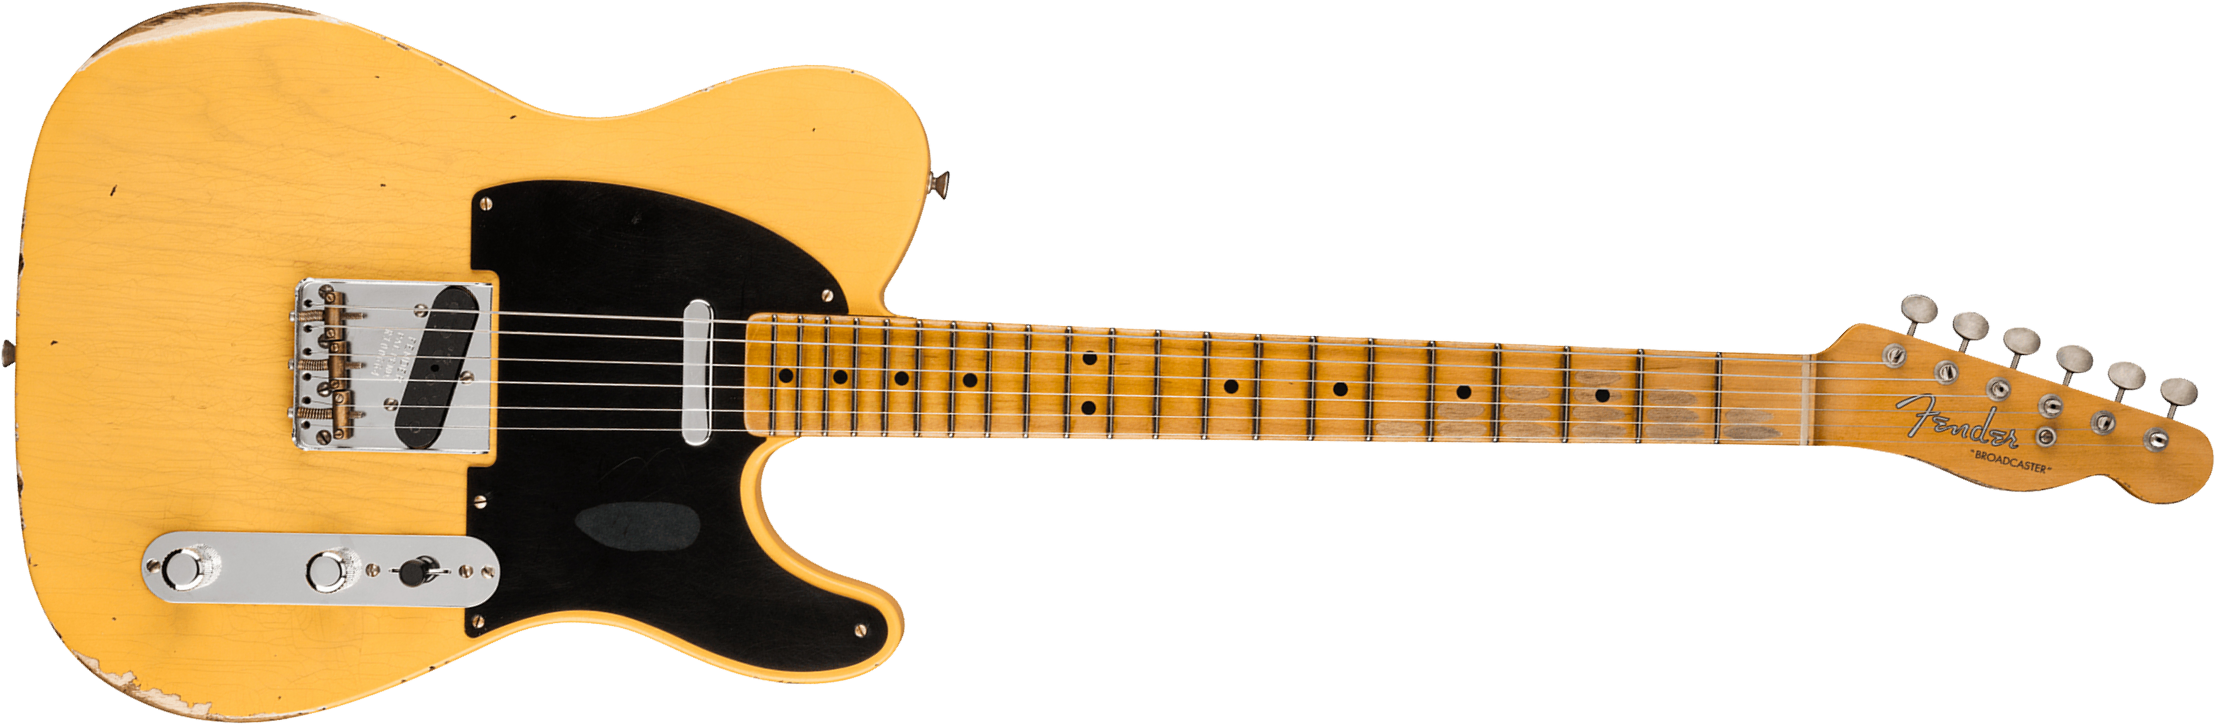 Fender Custom Shop Broadcaster Tele 70th Anniversary Ltd Mn - Relic Aged Nocaster Blonde - Tel shape electric guitar - Main picture